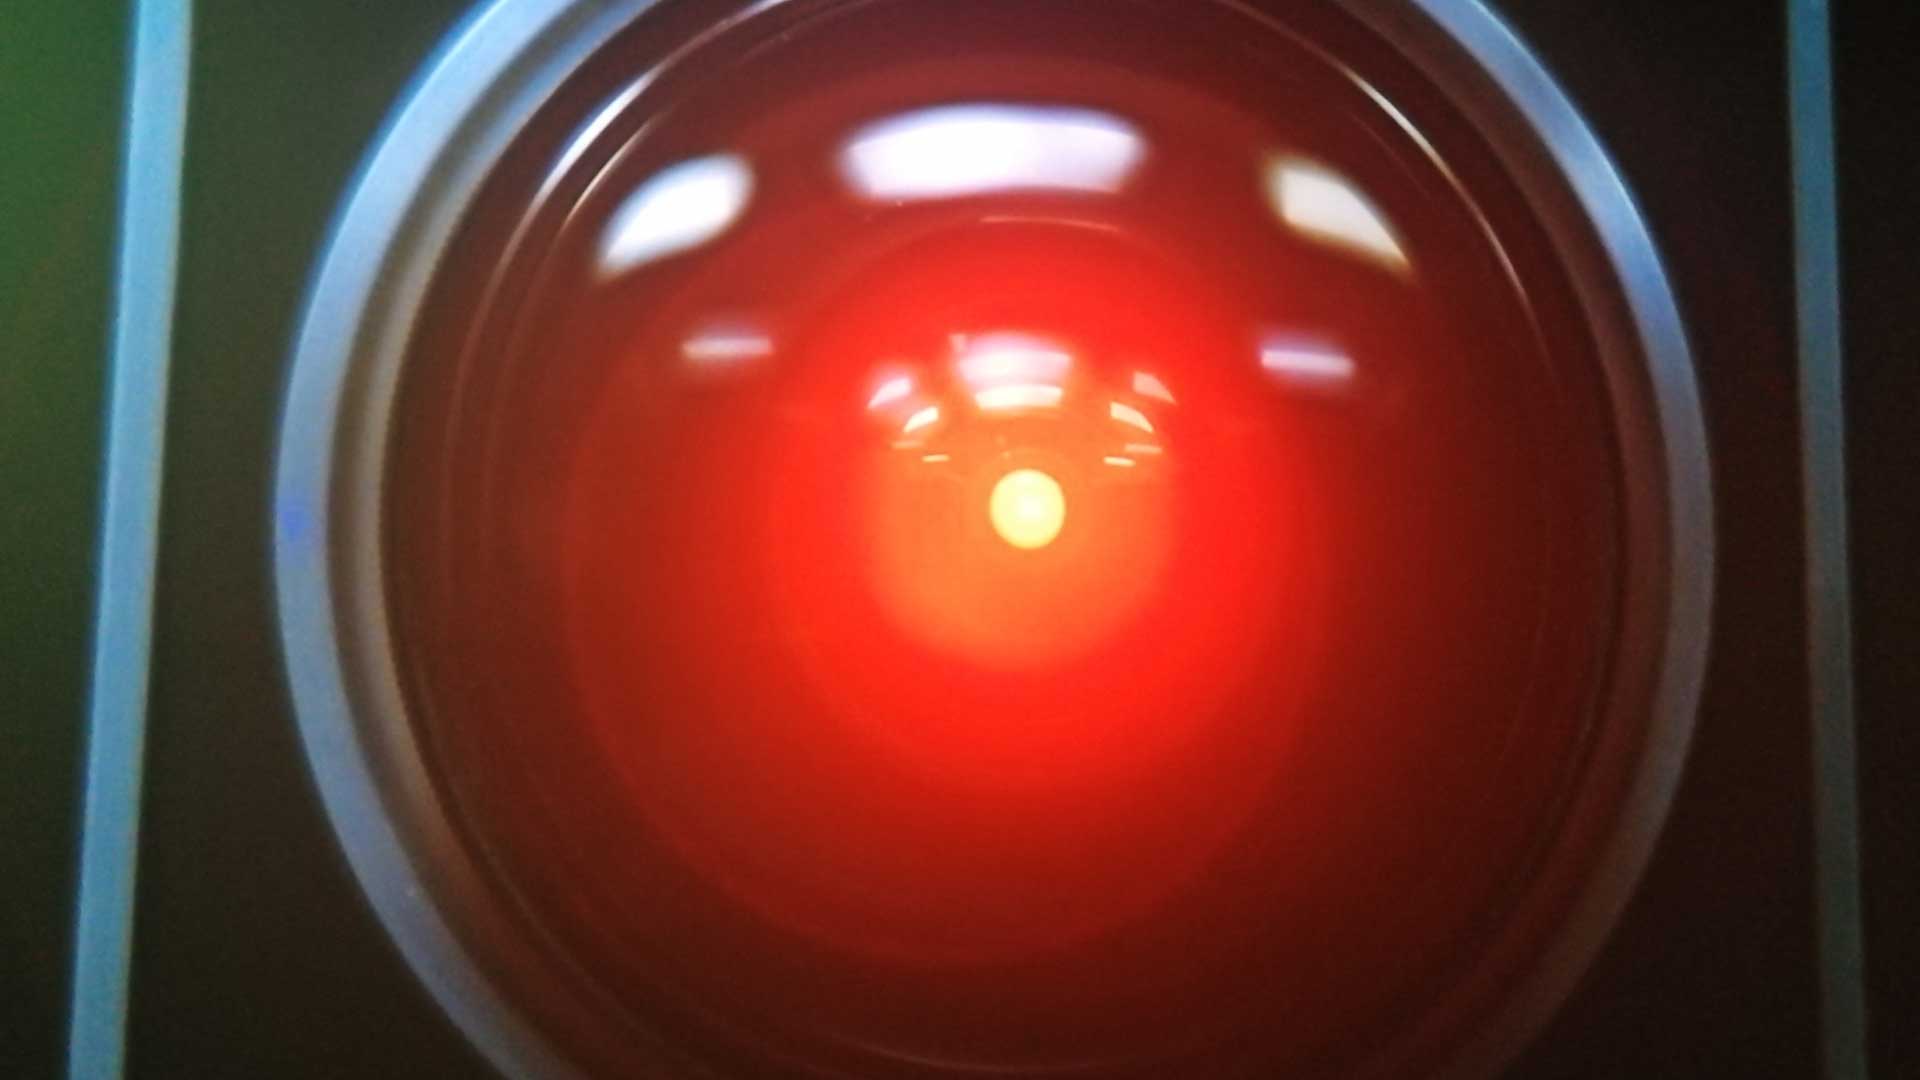 HAL 9000 from 